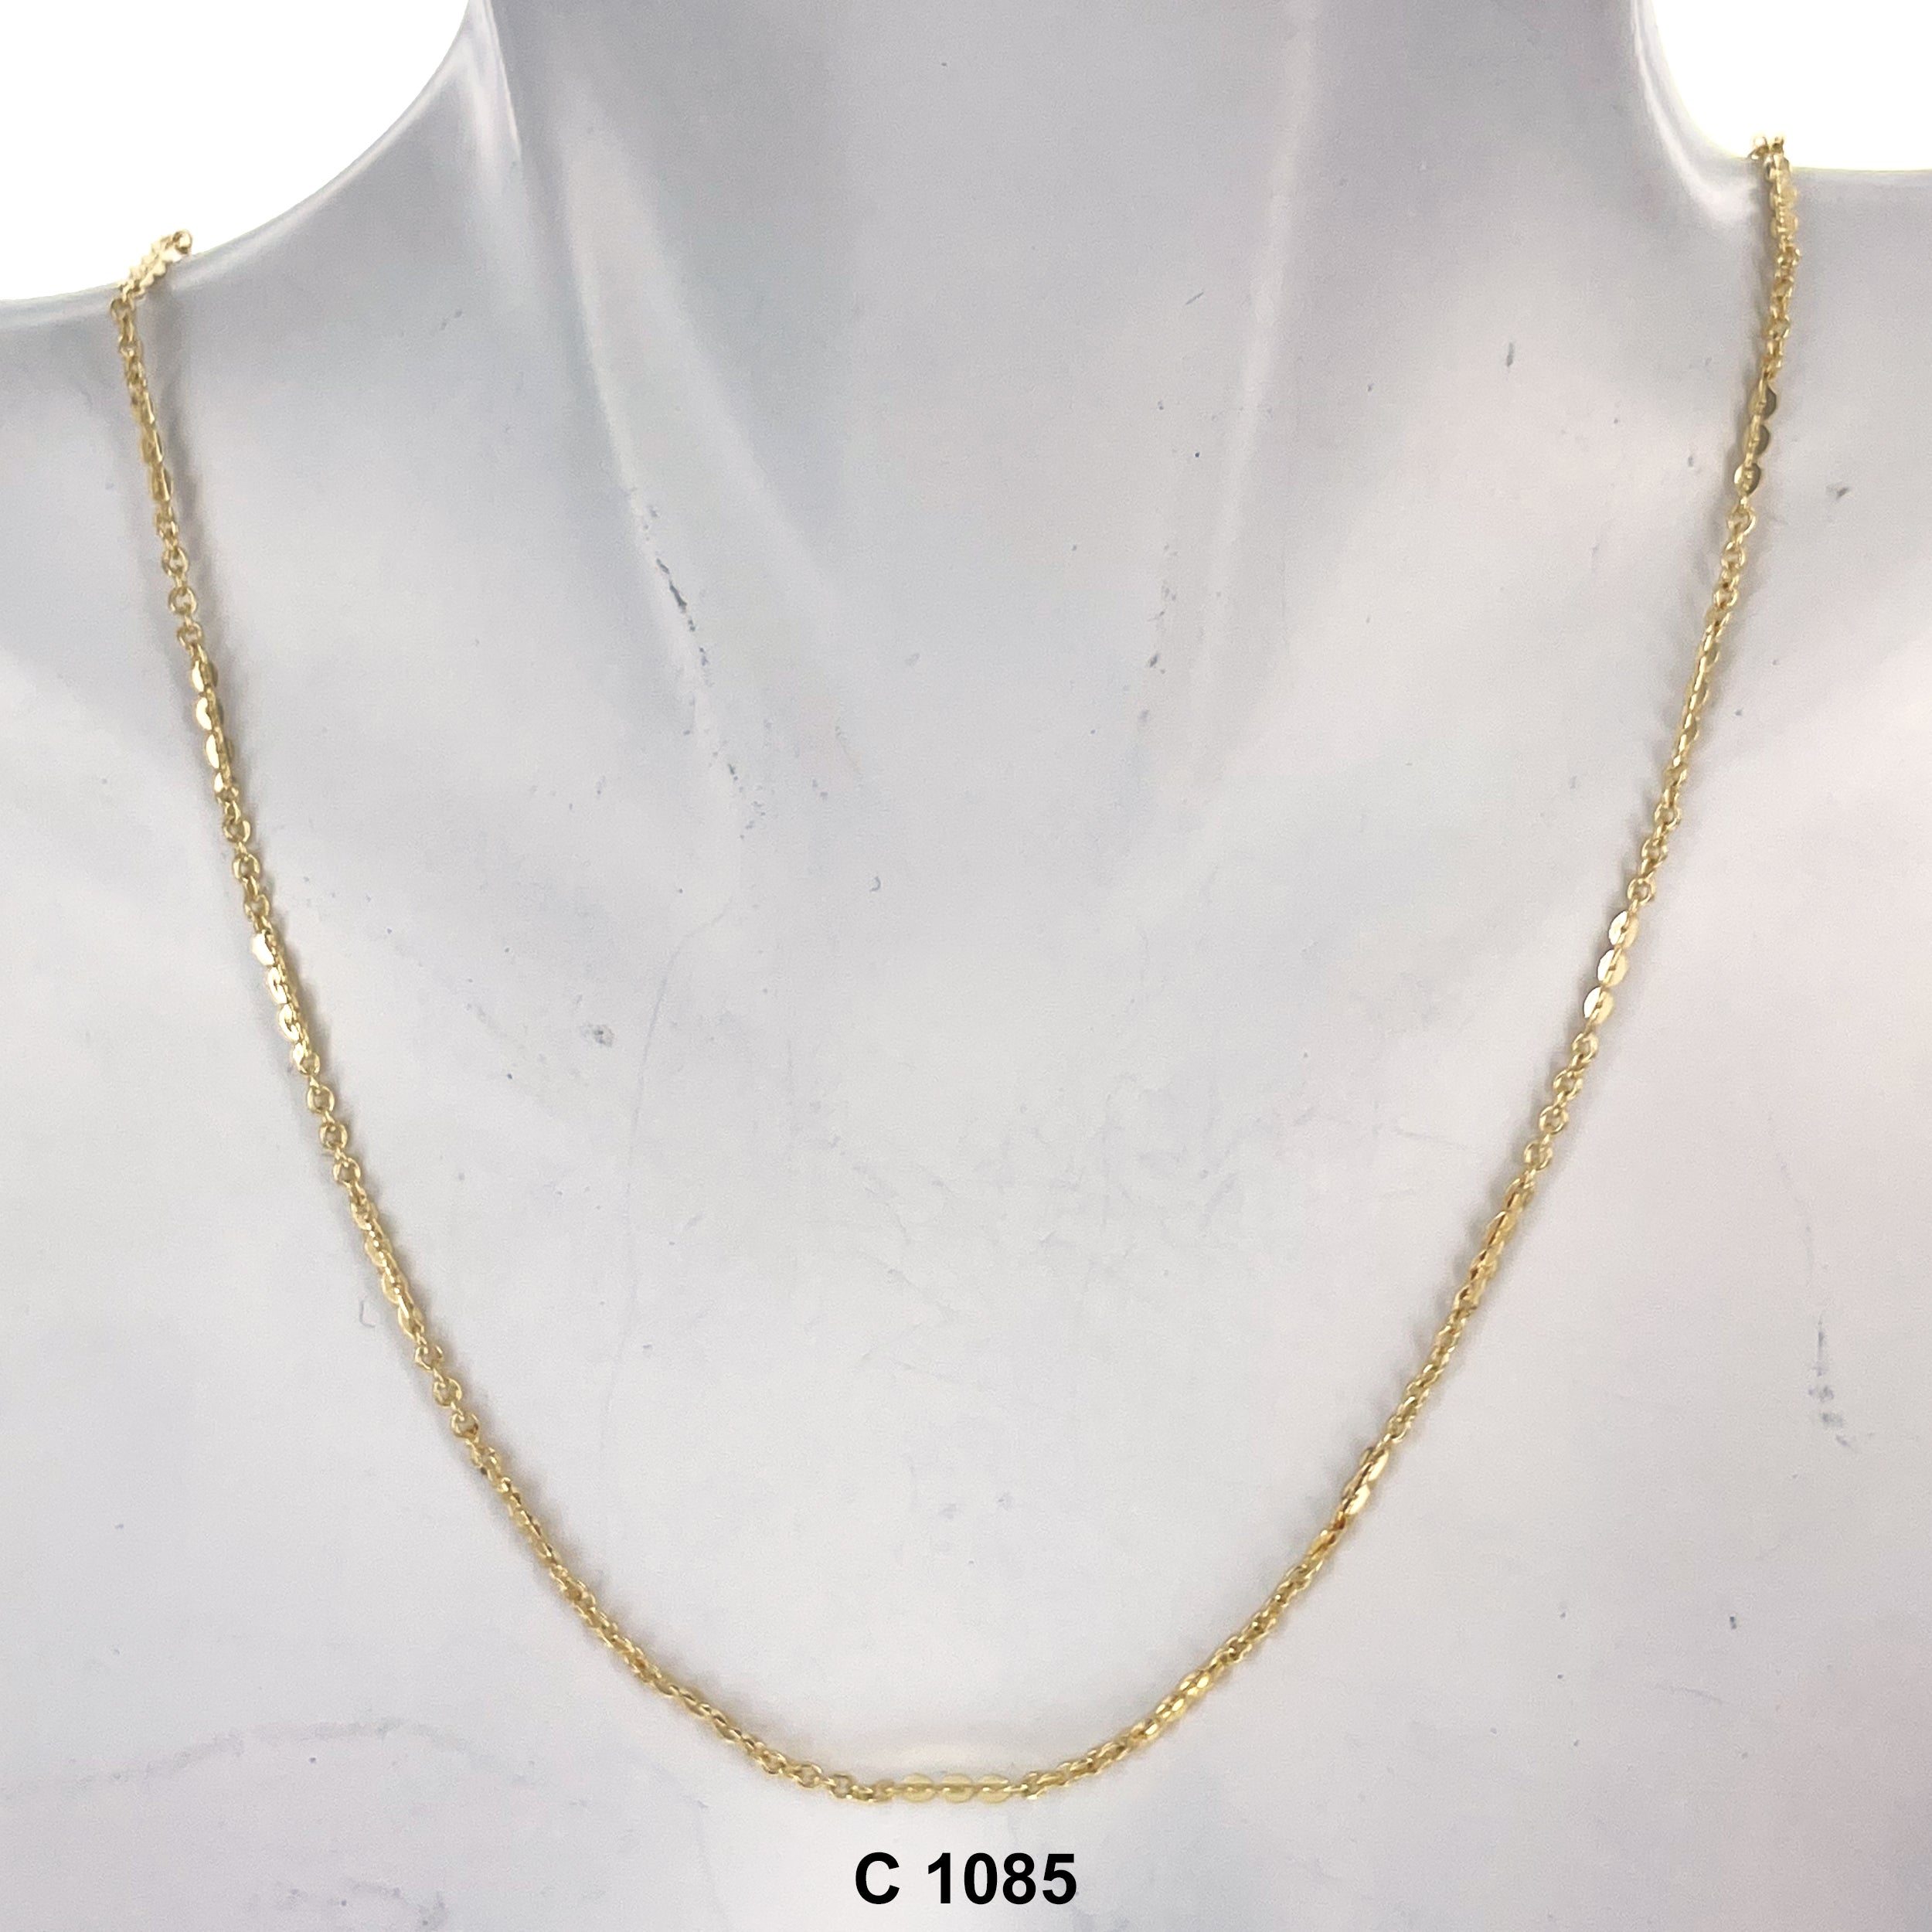 1.5 MM Gold Plated Chain C 1085